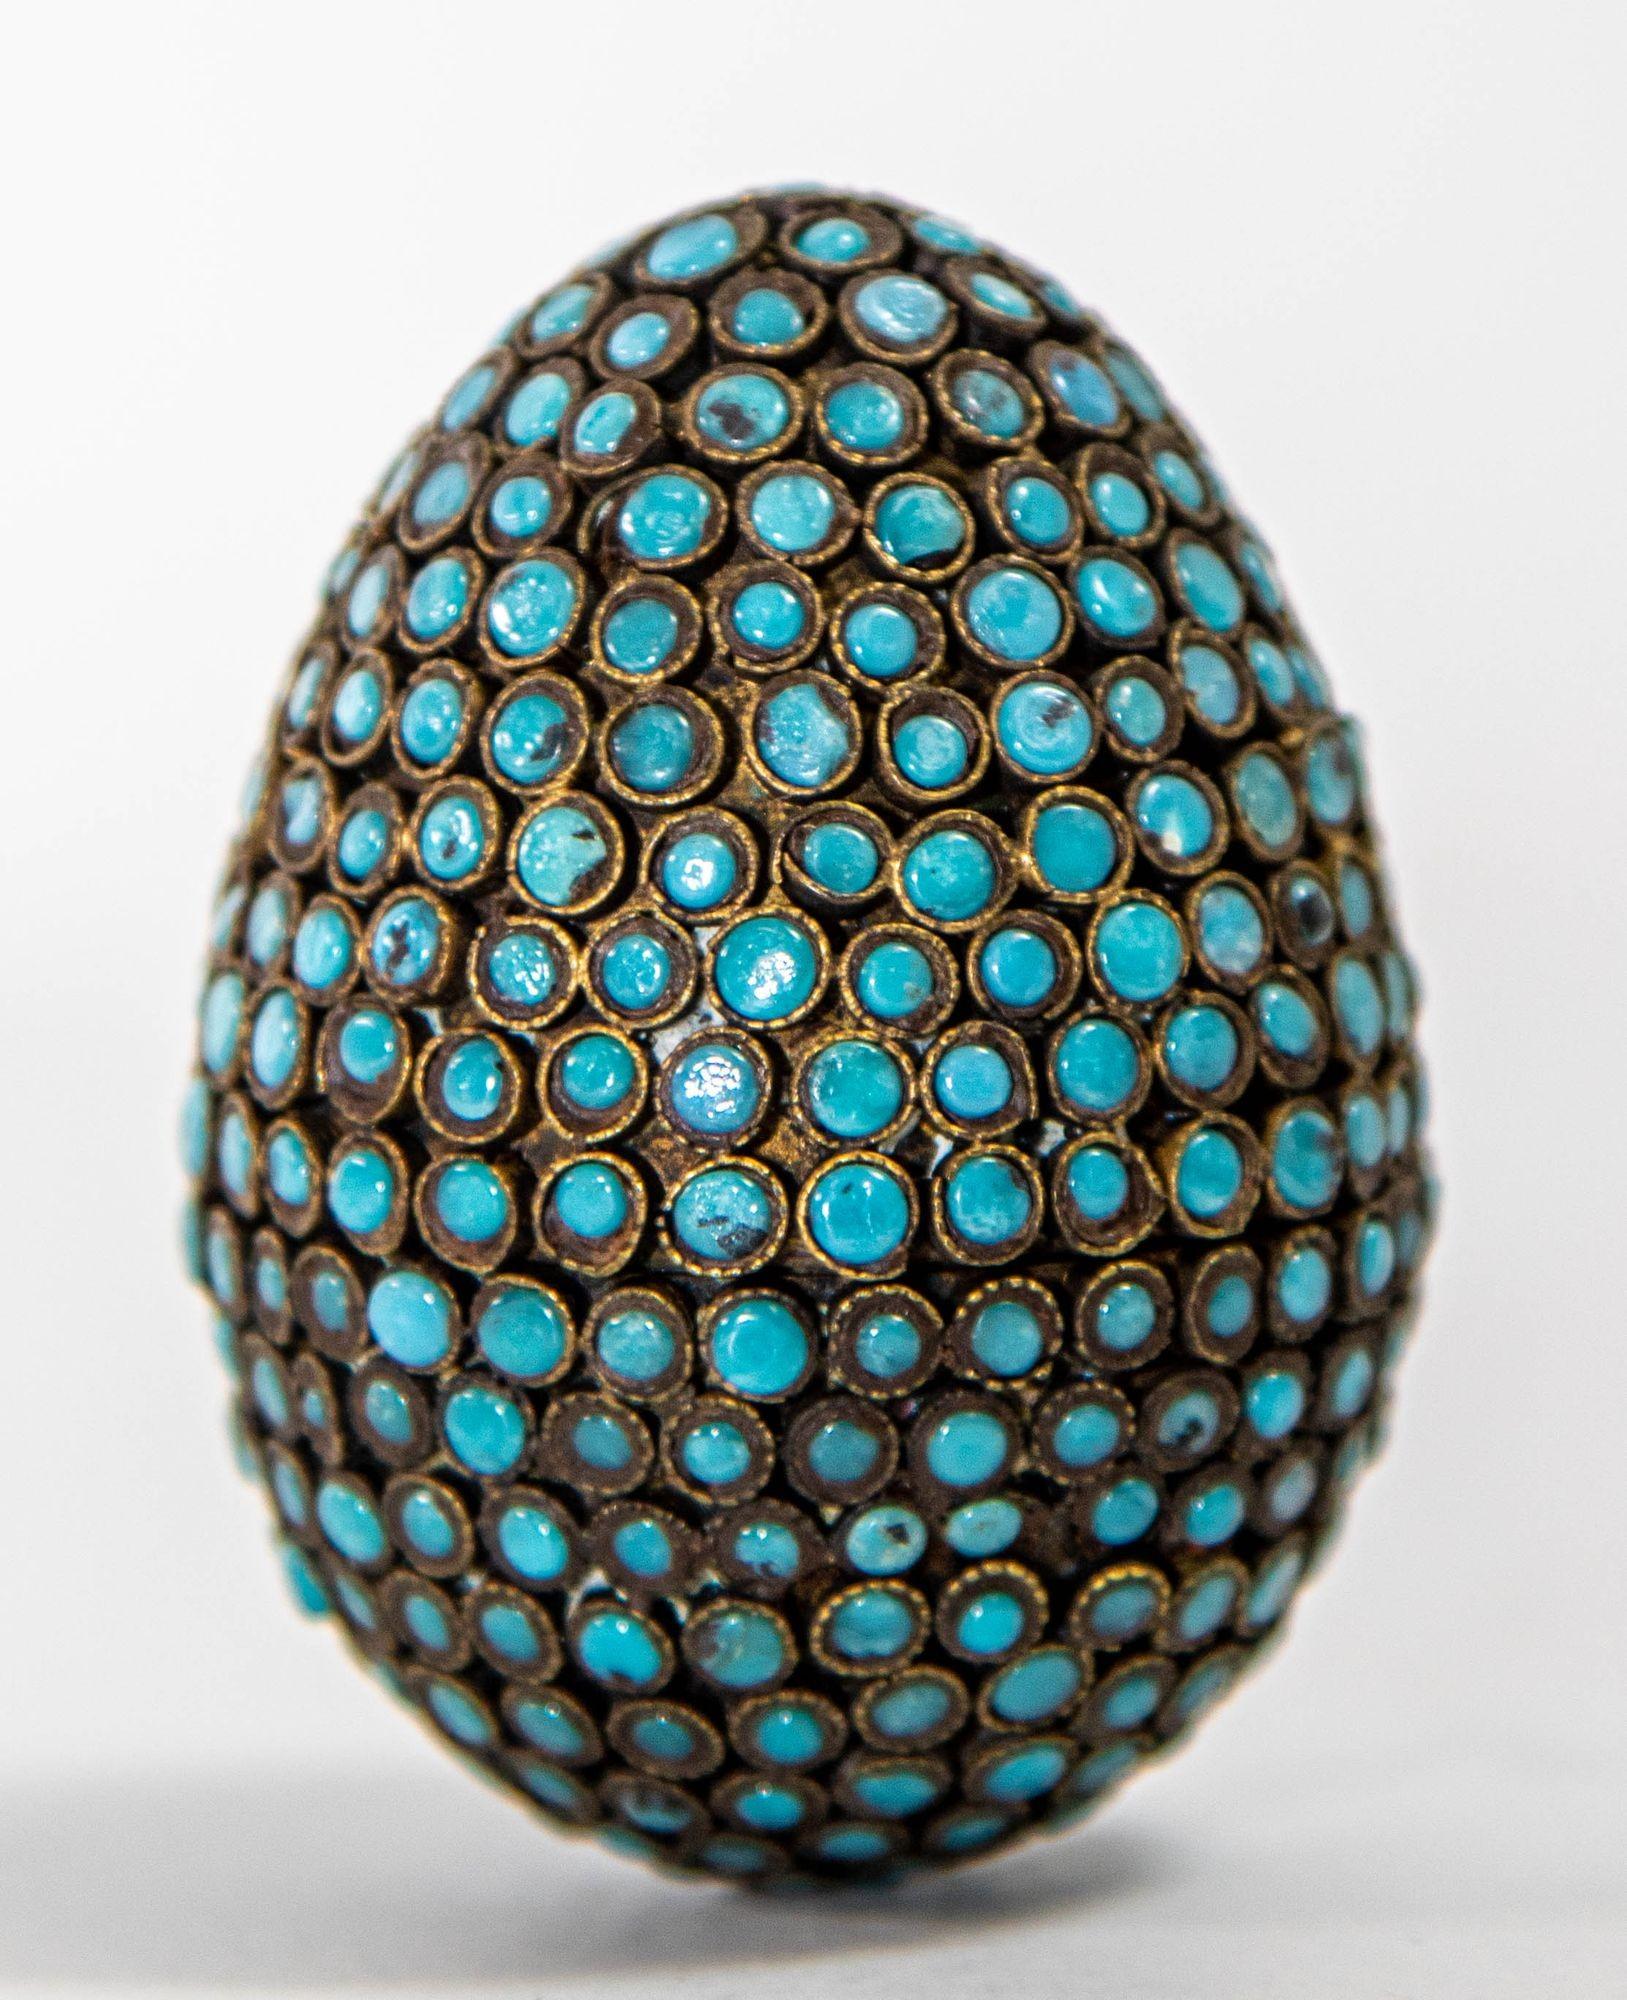 Antique Tibetan Egg Shaped Box with Turquoise Blue Stone Inlay For Sale 3